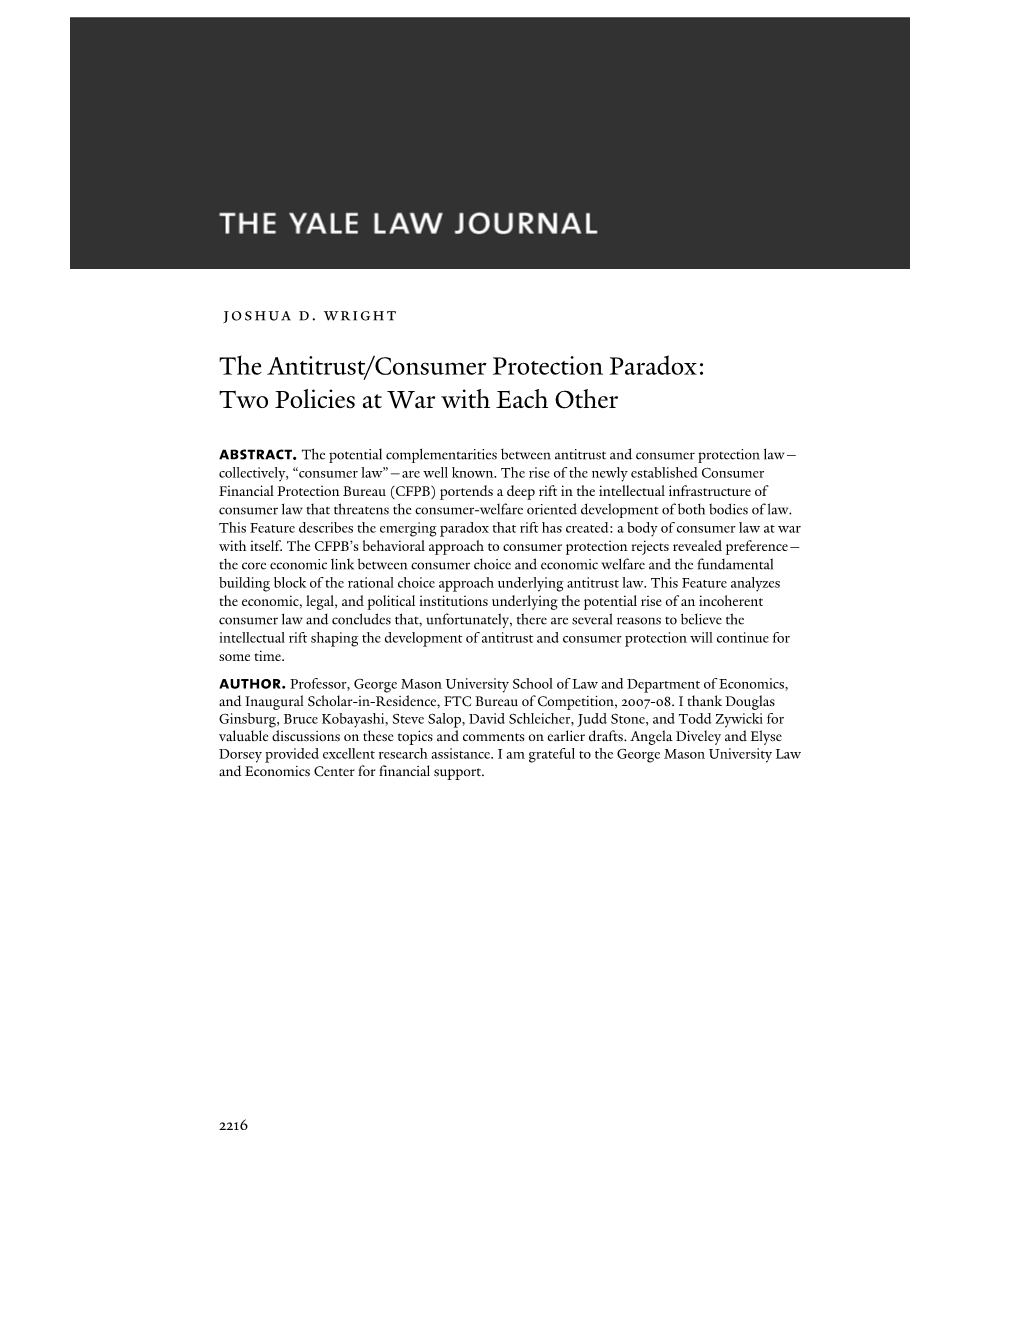 The Antitrust/Consumer Protection Paradox: Two Policies at War with Each Other Abstract